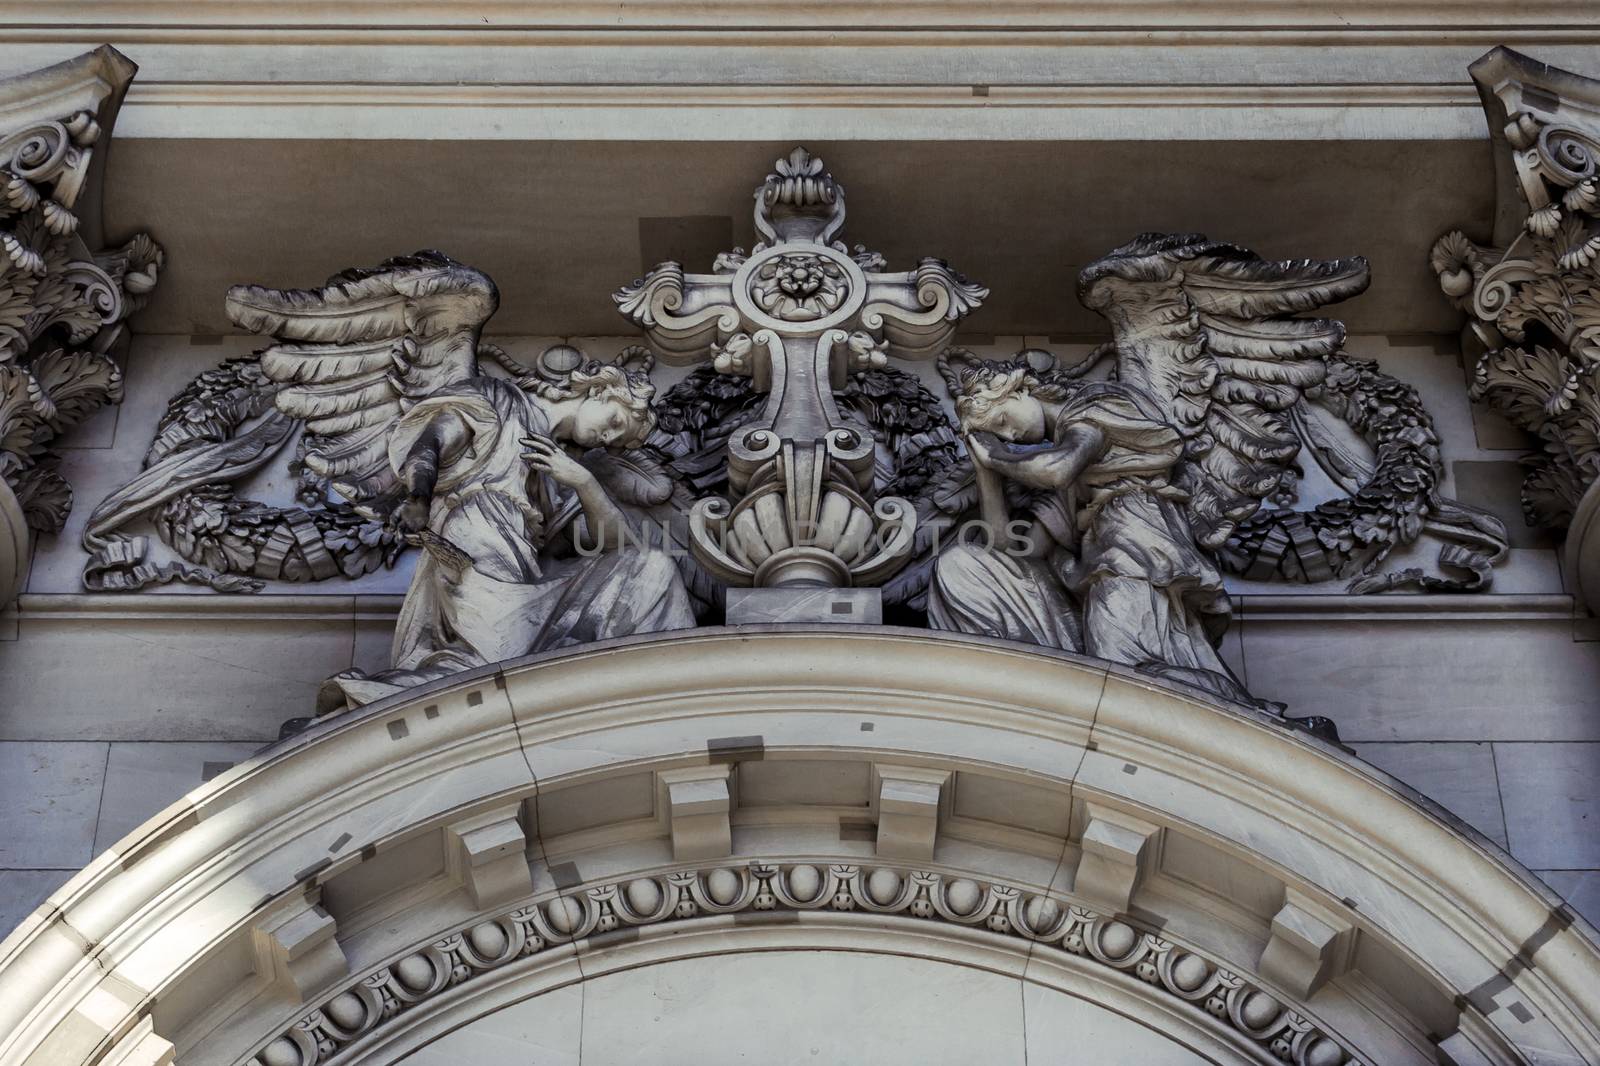 A close-up exterior view on a sculptural composition above the entrance of Dom Berliner, also known as the Berlin Cathedral in the historic city of Berlin in Germany.